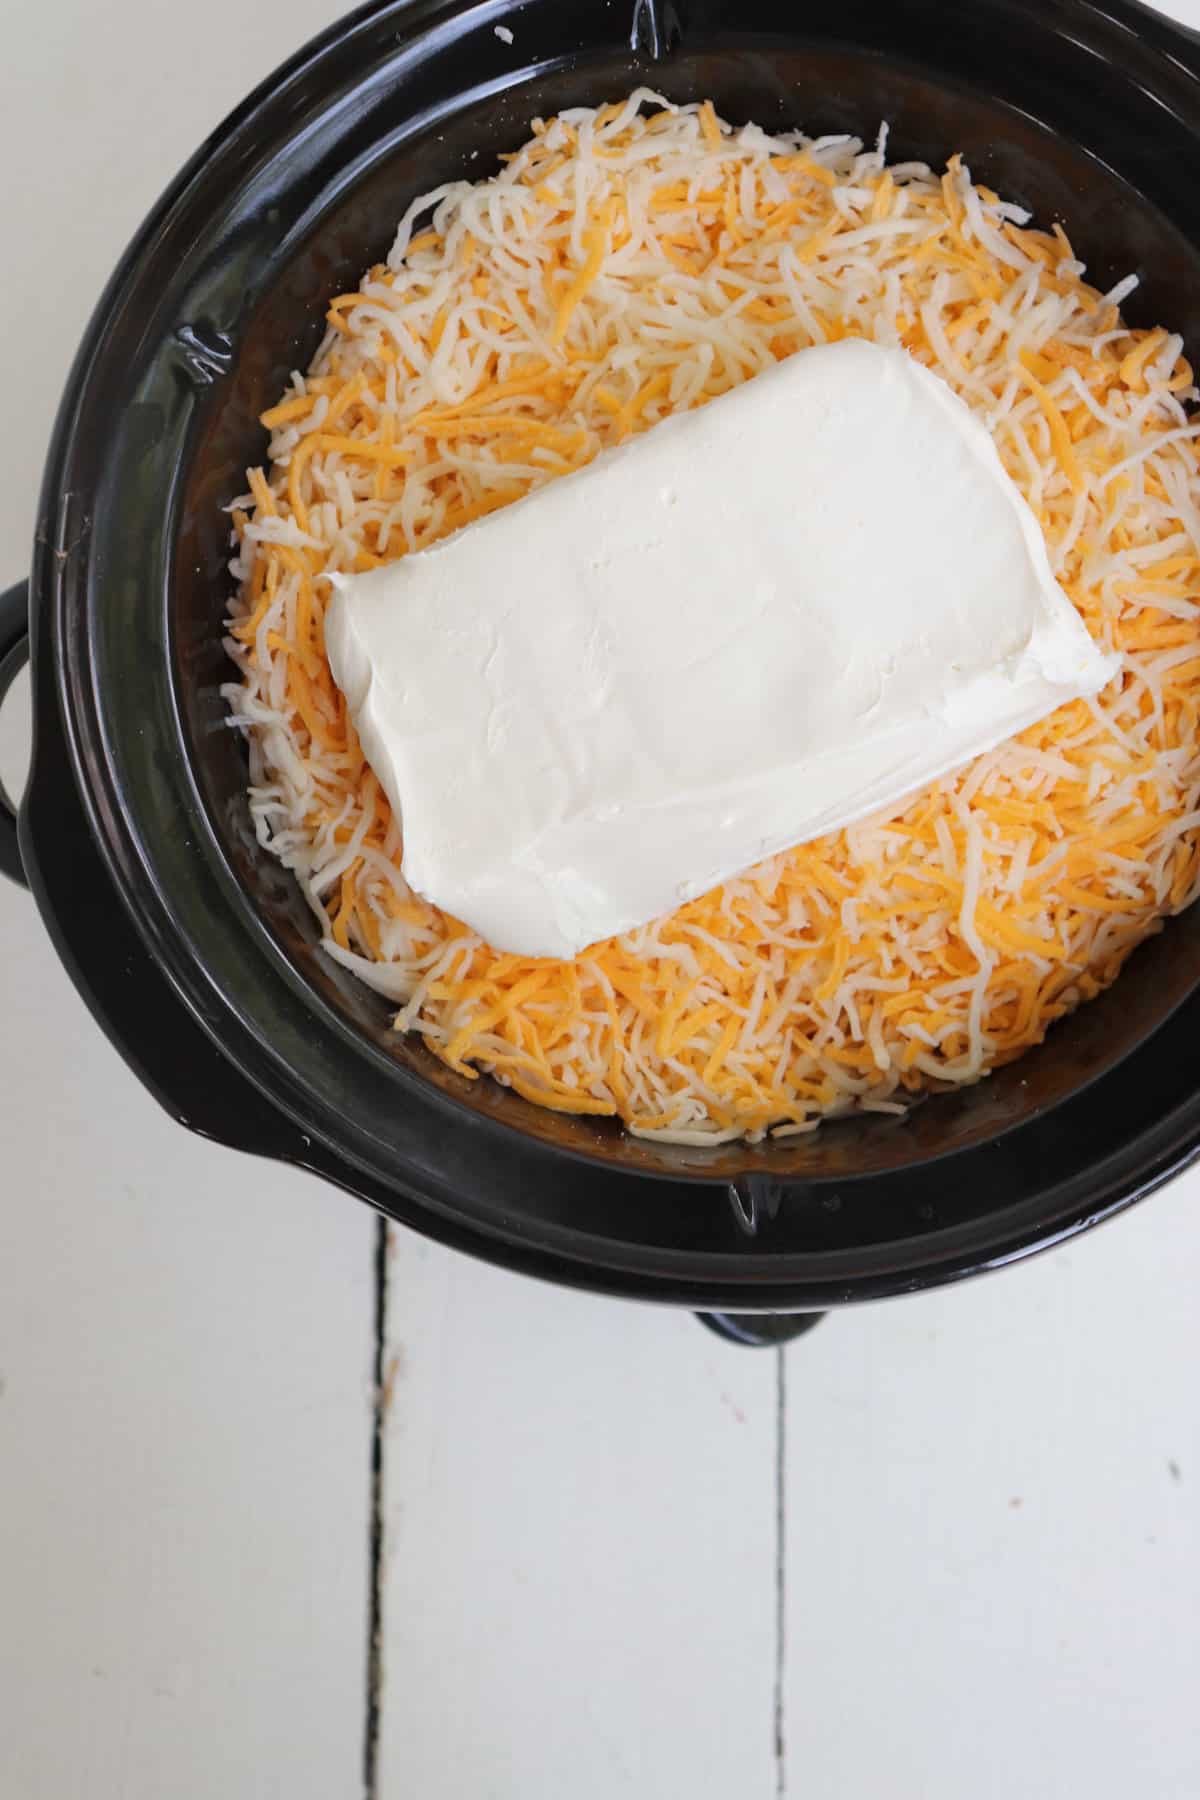 block of cream cheese on top of shredded cheese in crock pot.